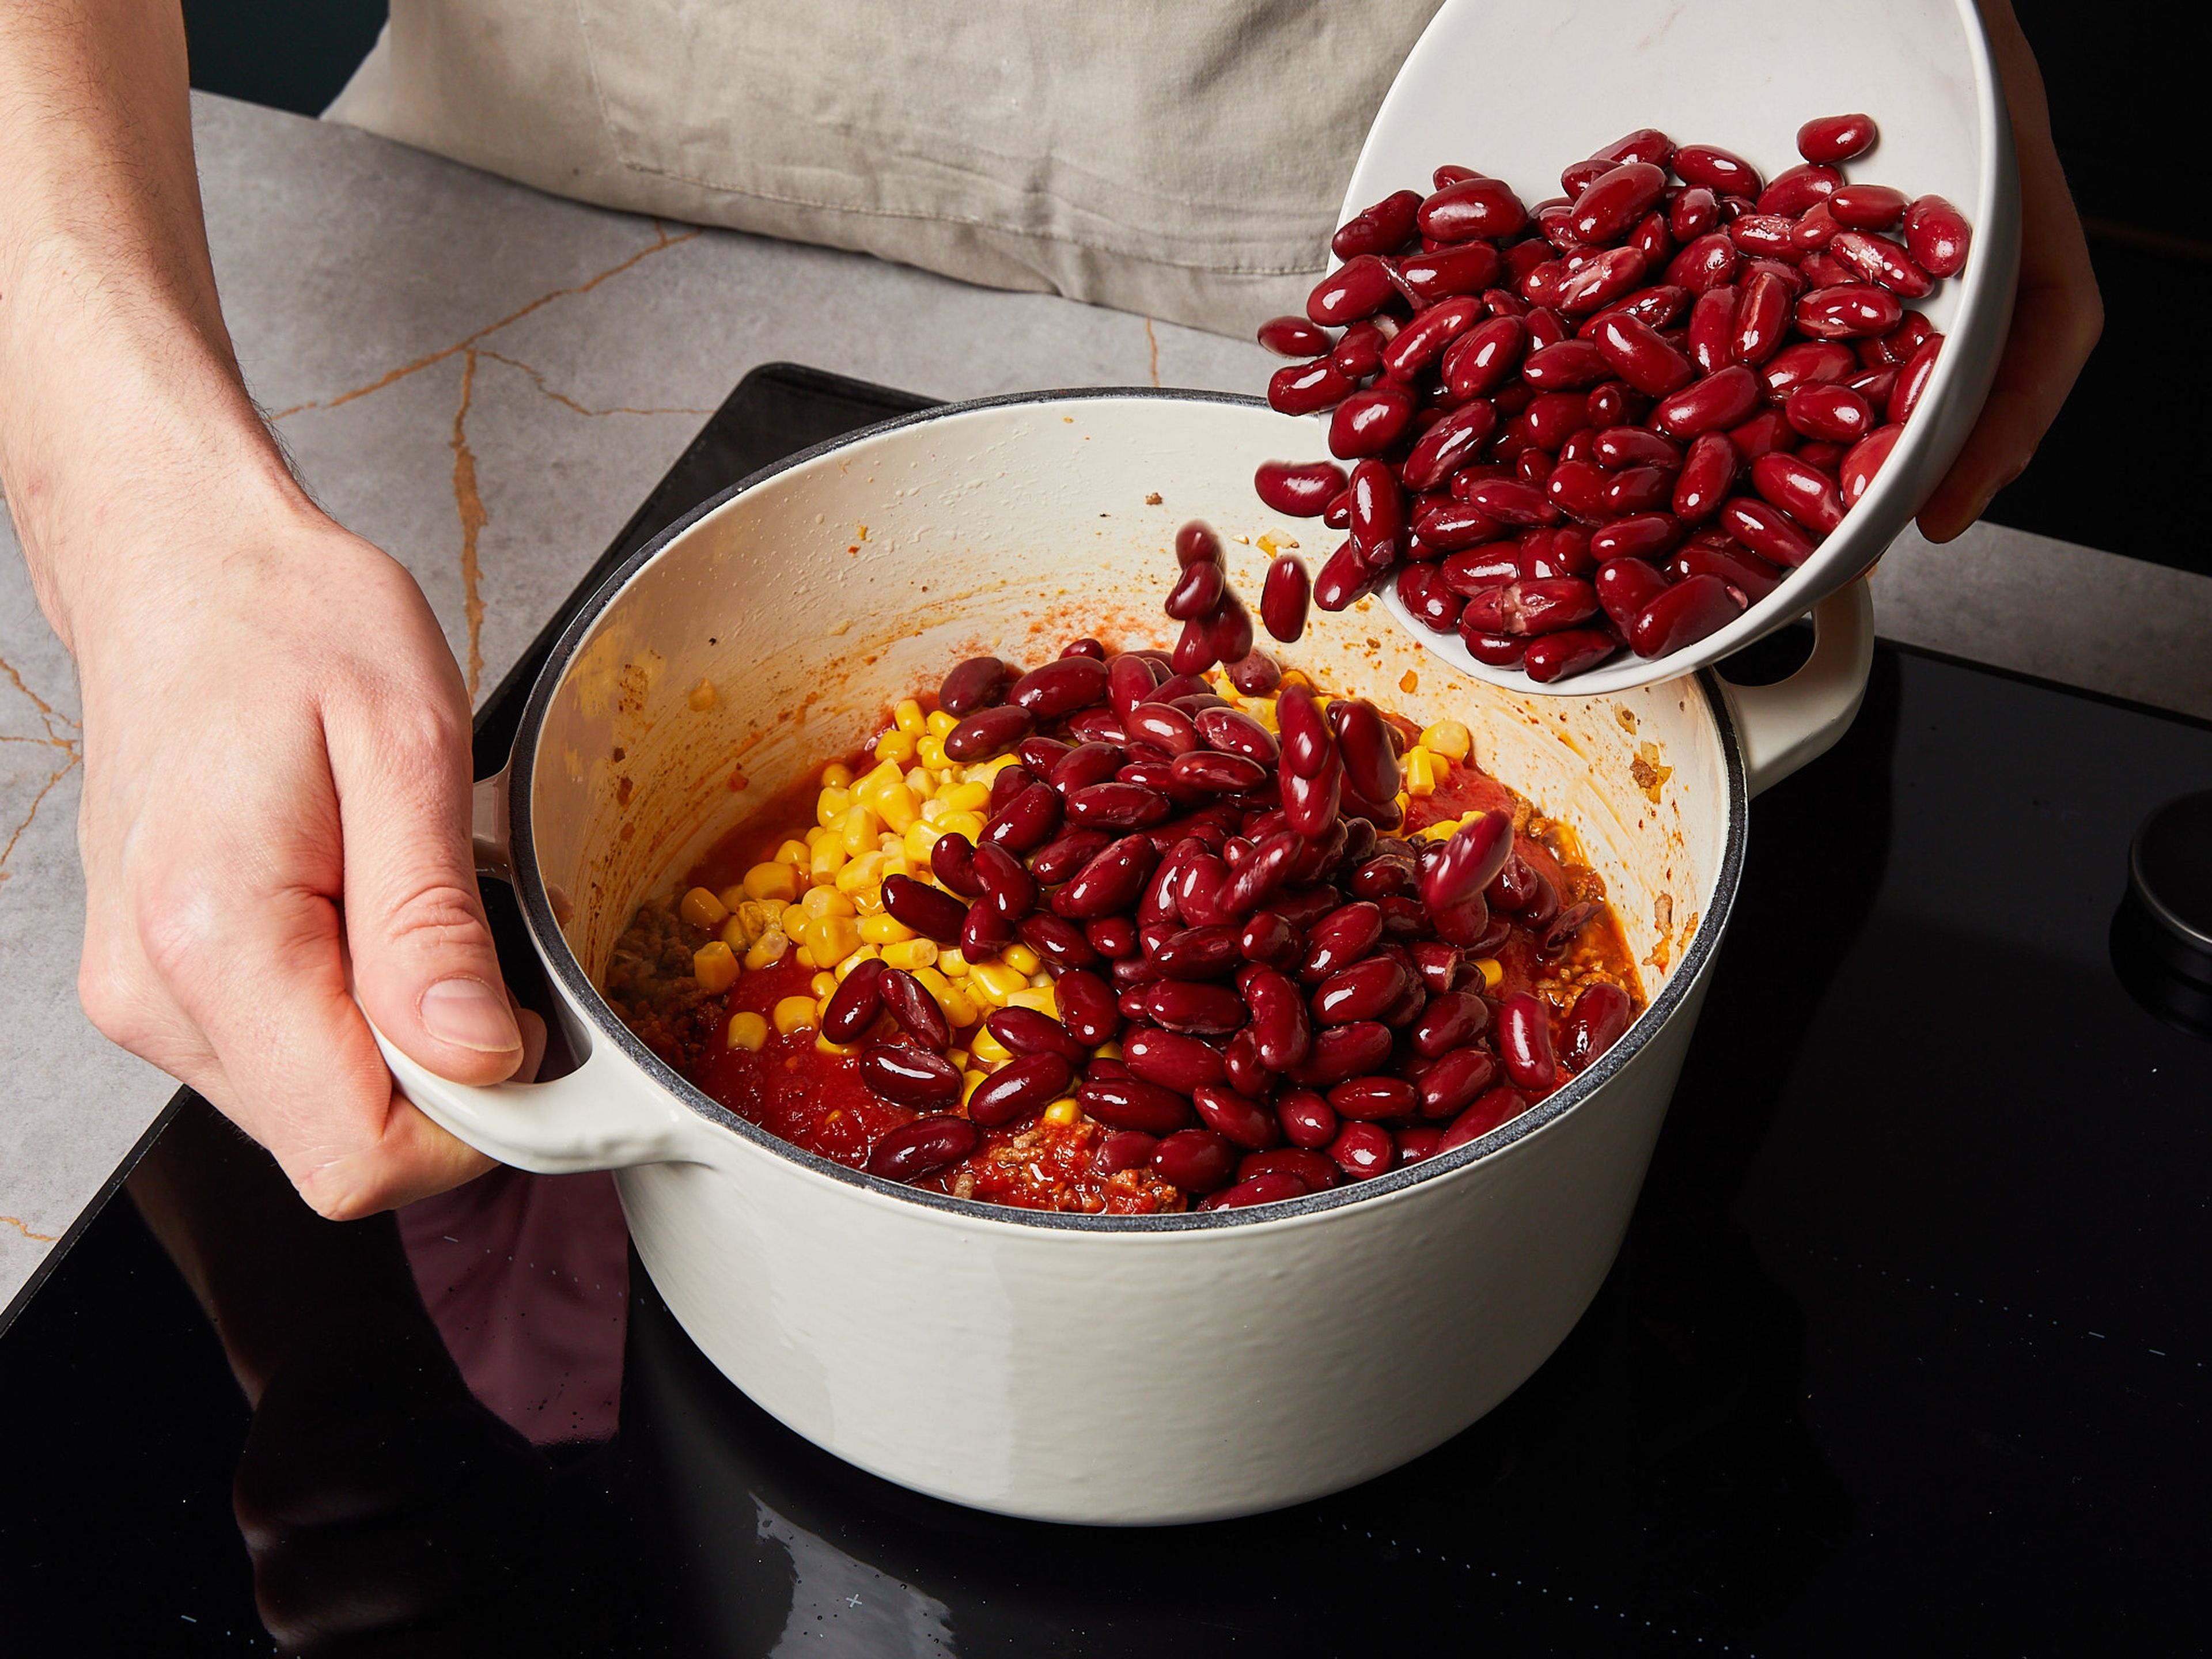 Add canned crushed tomatoes, sweet corn, kidney beans, and the chopped red pepper. Stir well to combine.  Leave to simmer for approx. 15—18 min. over low-medium heat. Stir occasionally. Season to taste with sugar, salt, and pepper. Serve with aromatic rice and sour cream.